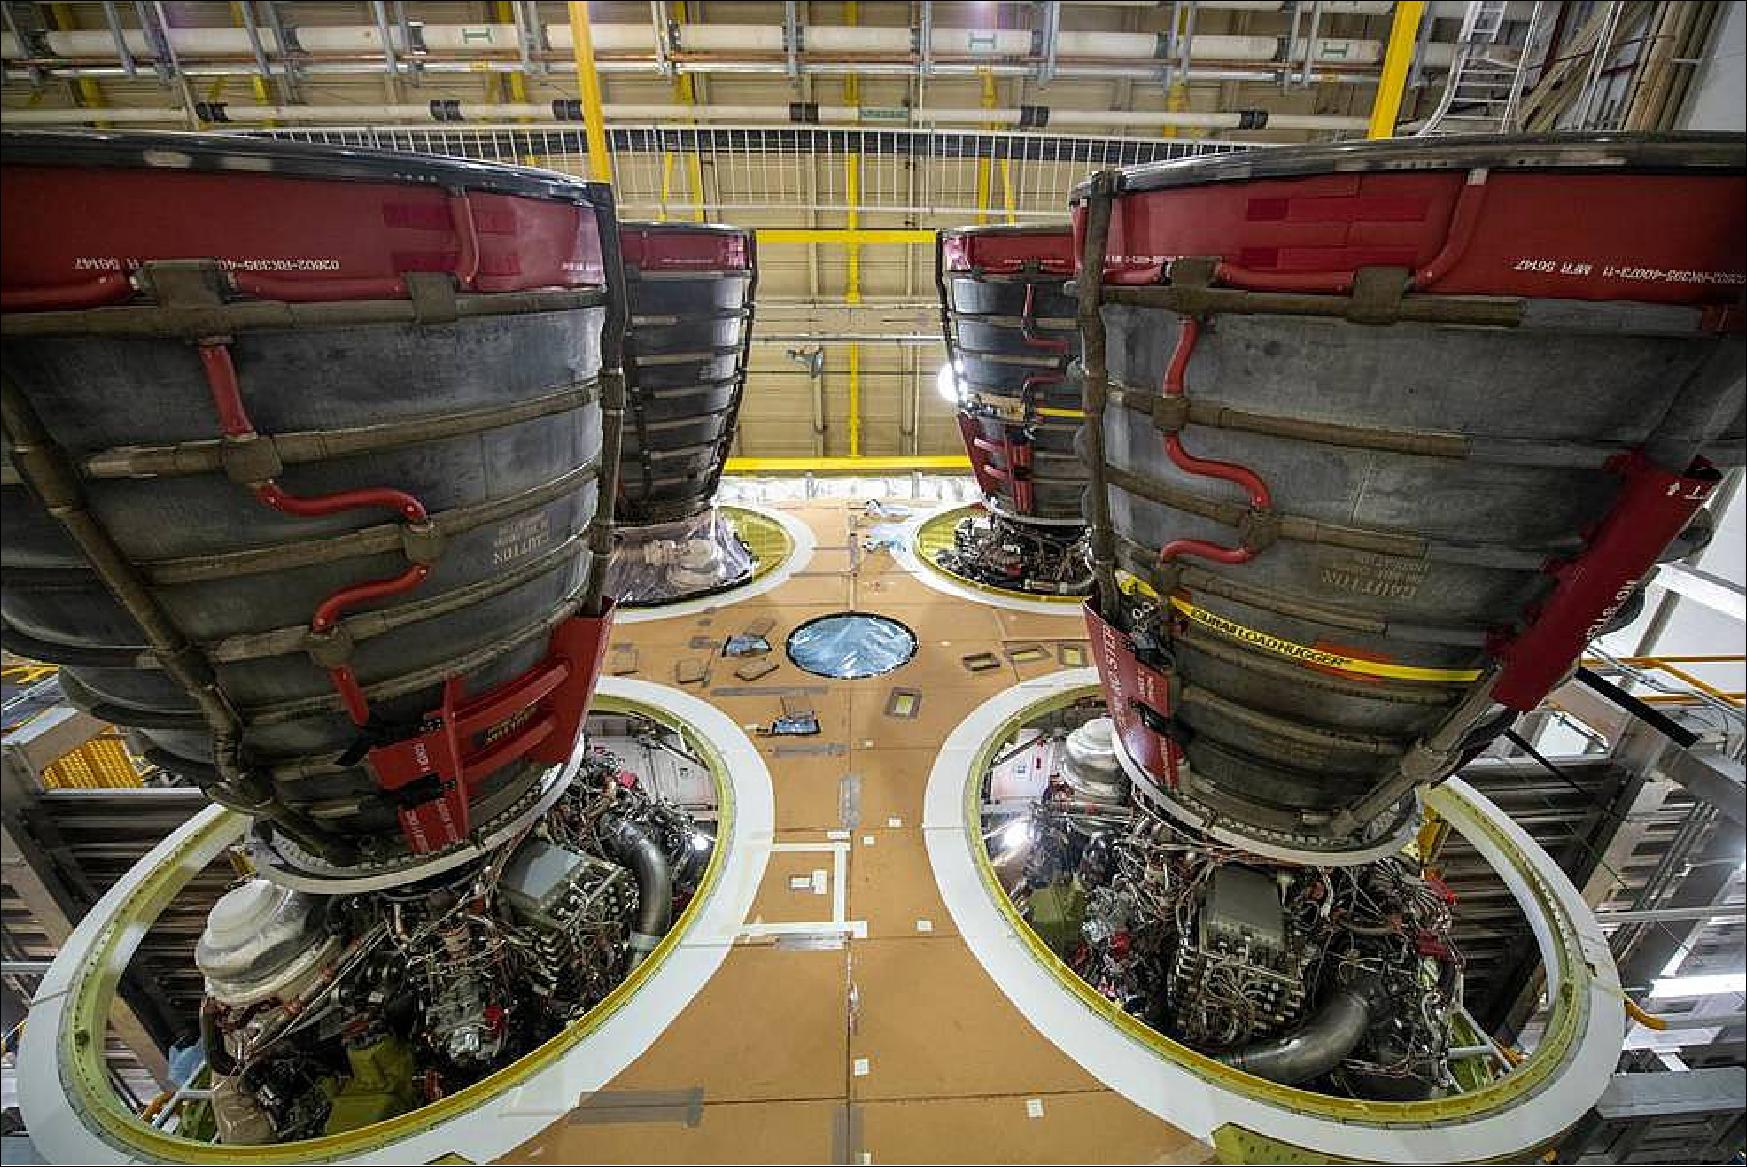 Figure 38: ASA has awarded a contract to Aerojet Rocketdyne of Sacramento, California, to manufacture 18 additional Space Launch System (SLS) RS-25 rocket engines to support Artemis missions to the Moon. The four RS-25 engines, shown here, are attached to the SLS core stage that will send the Artemis I mission to the Moon. Currently, the stage is undergoing a series of Green Run tests in a test stand at Stennis Space Center near Bay St. Louis, Mississippi. The additional engines will support future SLS flights to deep space (image credit: NASA/Jude Guidry)